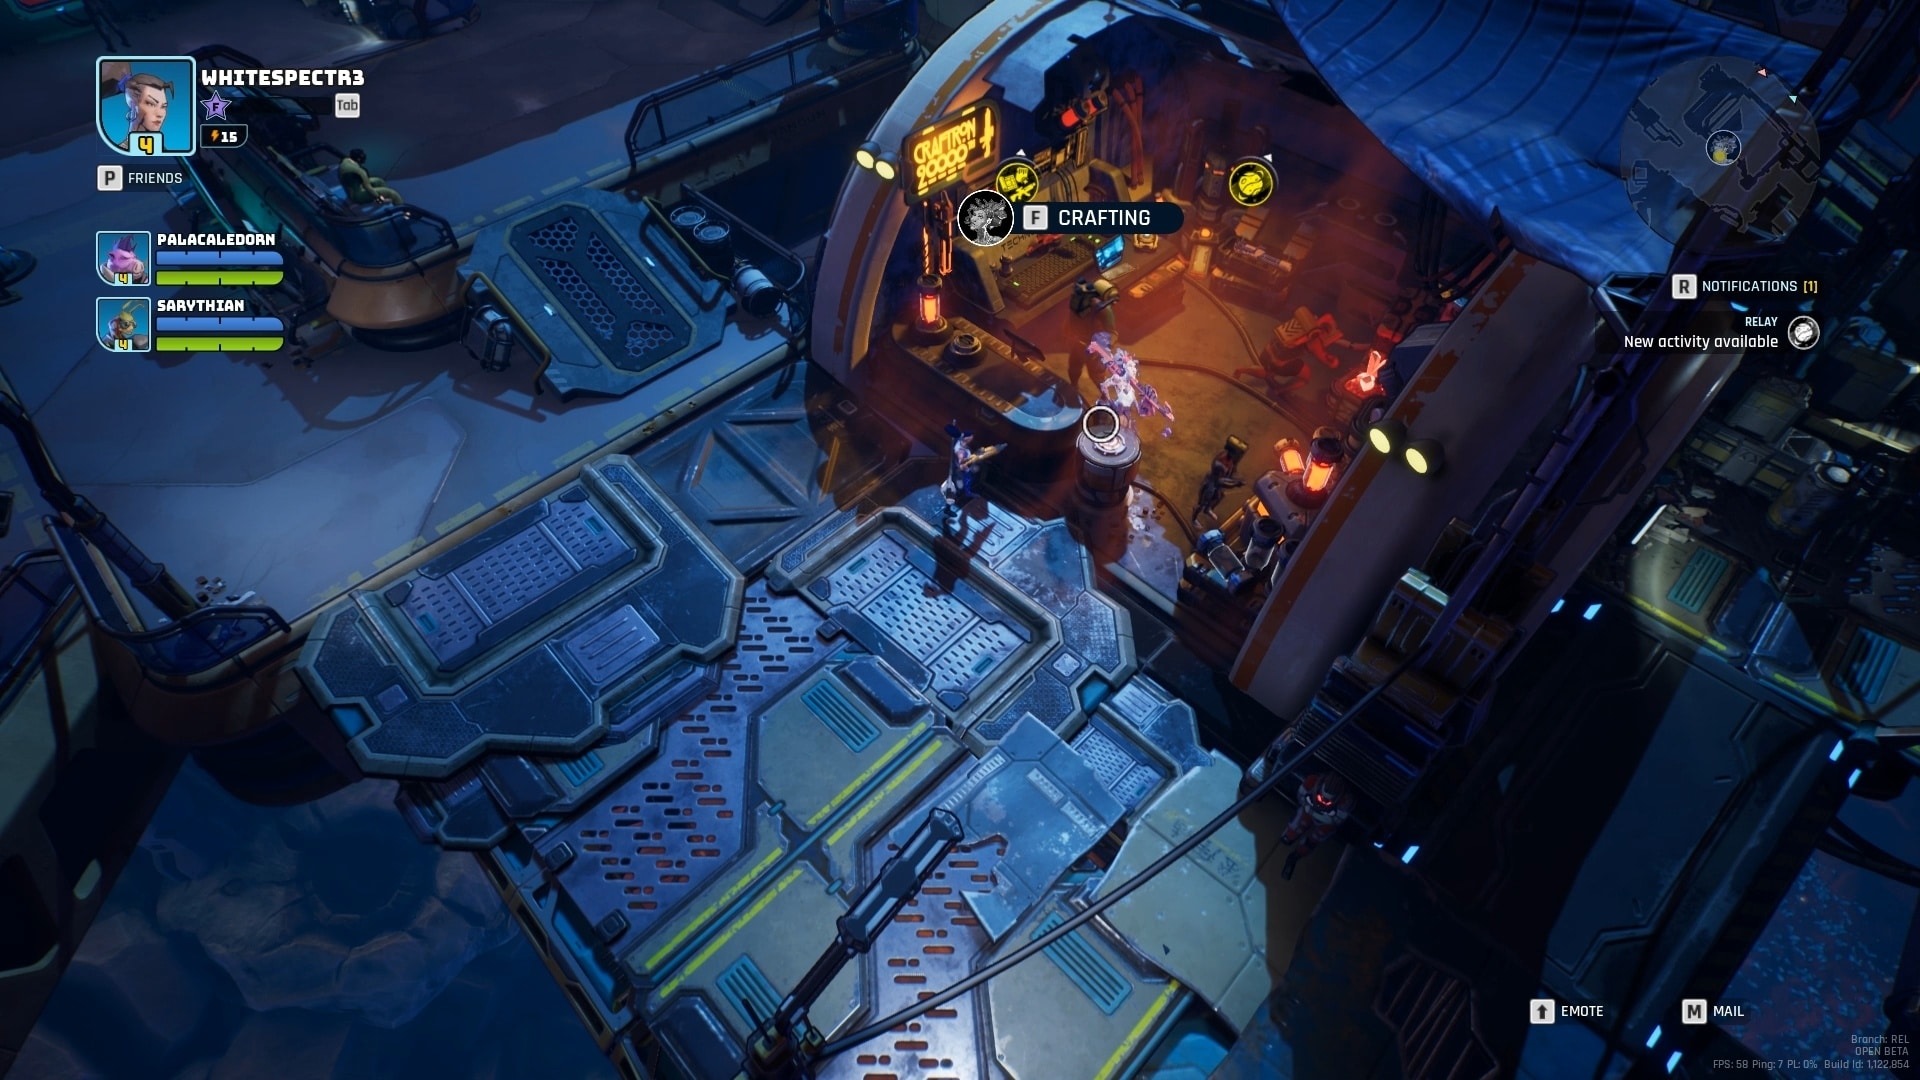 The Devil's Gambit space station provides an opportunity to craft new equipment between missions.